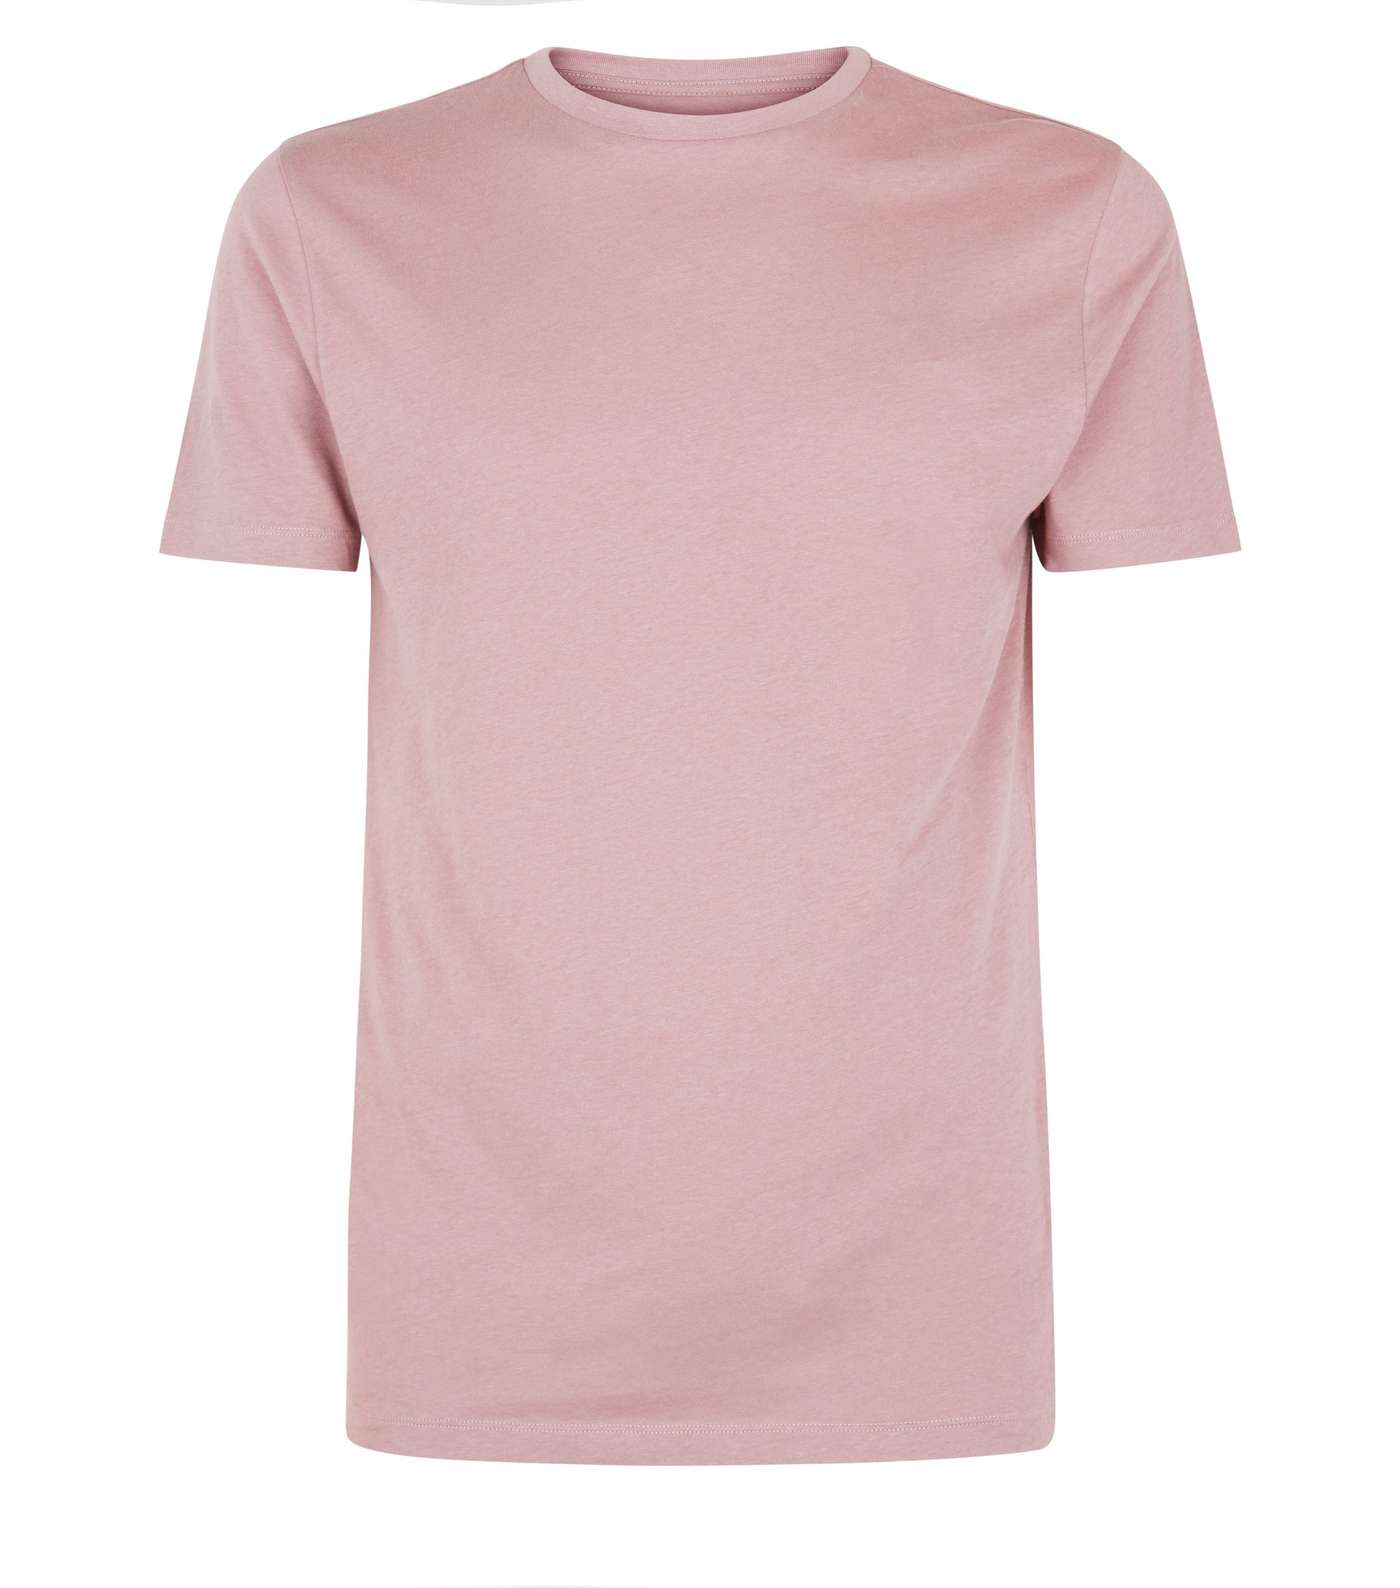 Pink Short Sleeve Muscle Fit T-Shirt Image 4